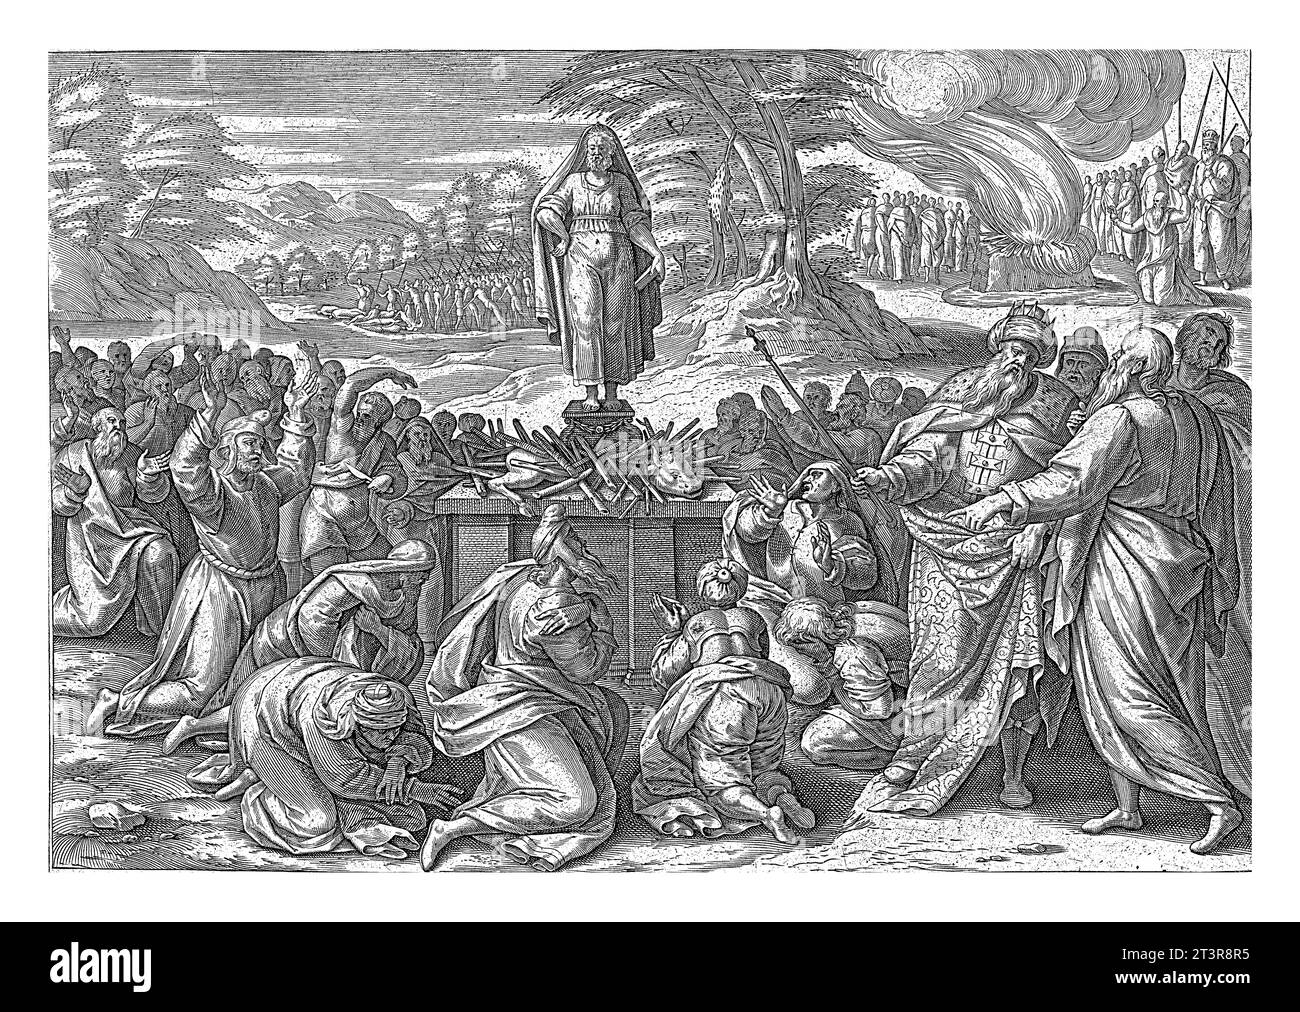 Elijah Competing with the Prophets of Baal, Jan Snellinck.The prophets of Baal, at Elijah's request, laid out a bull as a sacrifice to their god. They Stock Photo